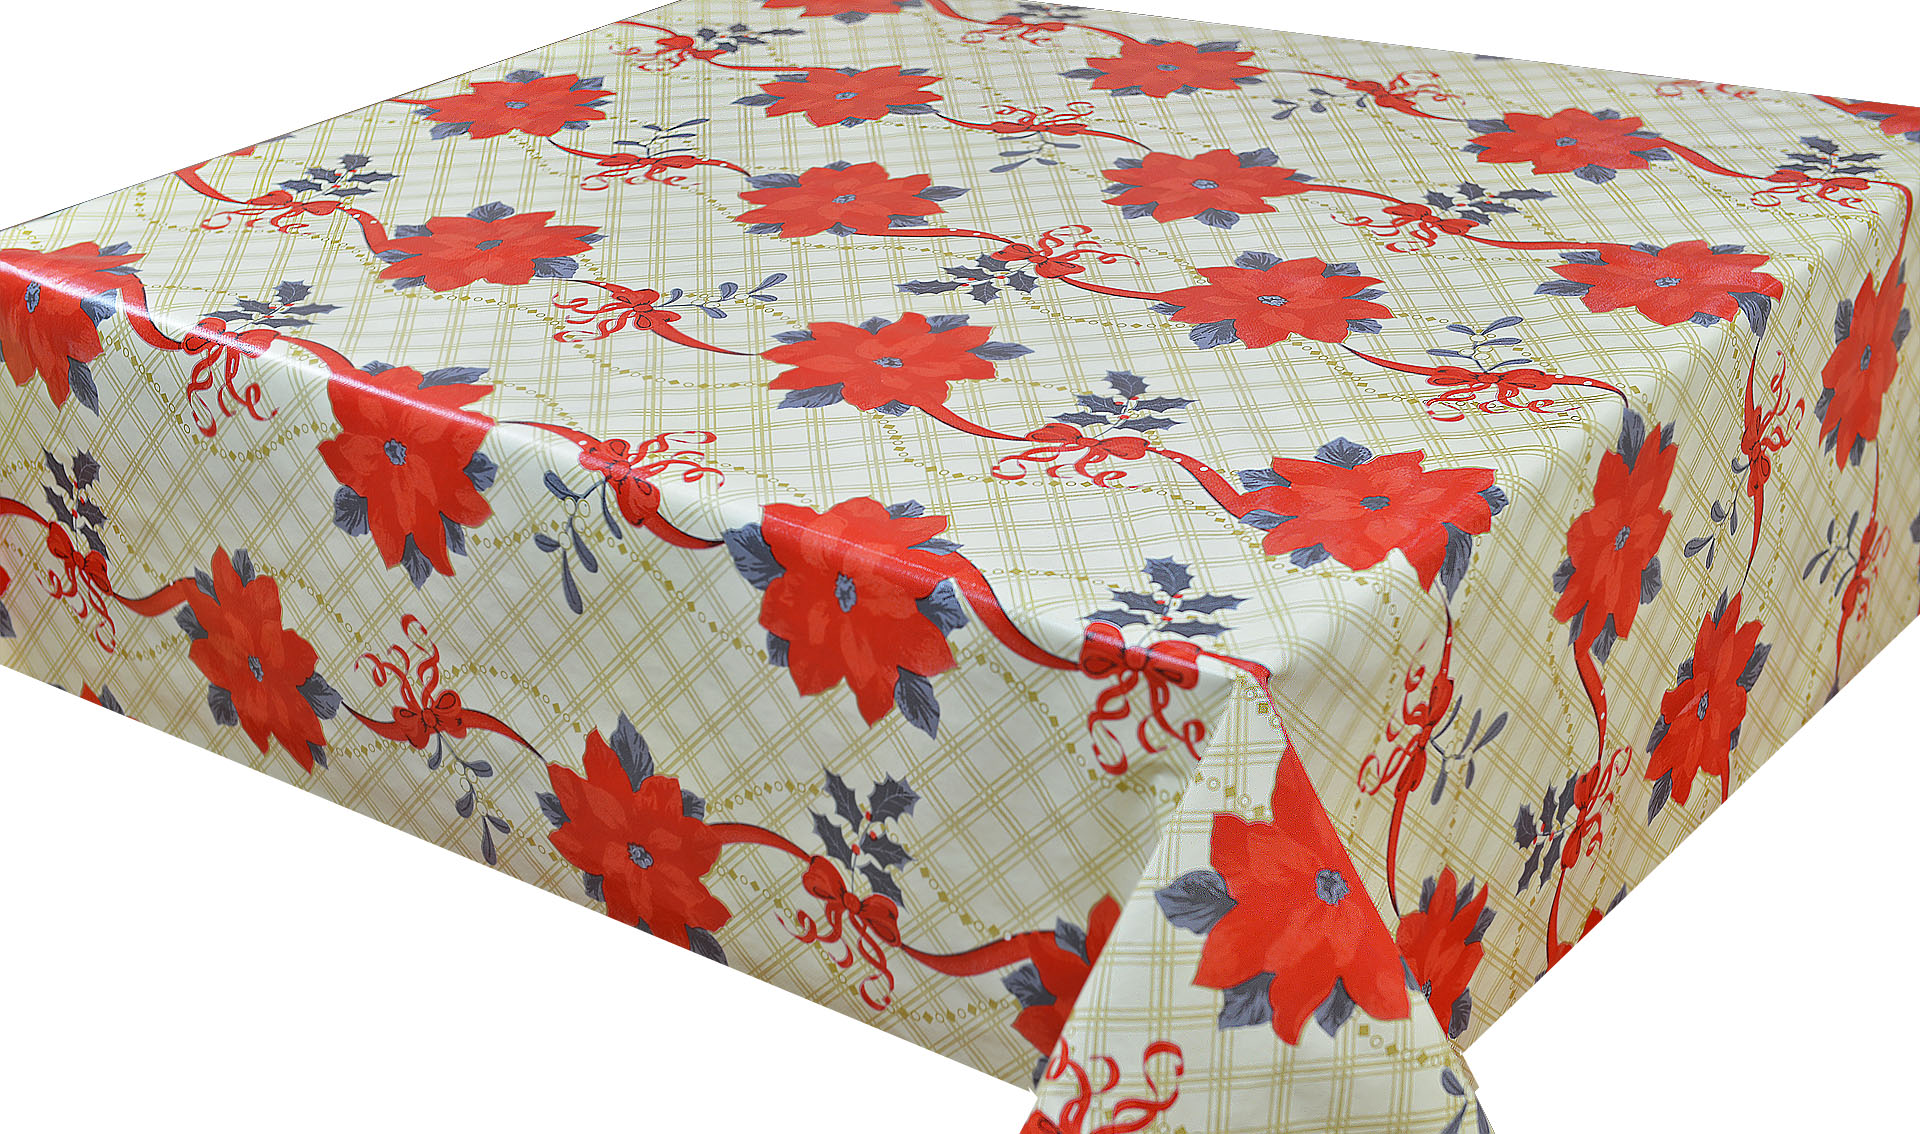 Table Cover - Printed Table Cover - Europe Design Table Cover - BS-M8244